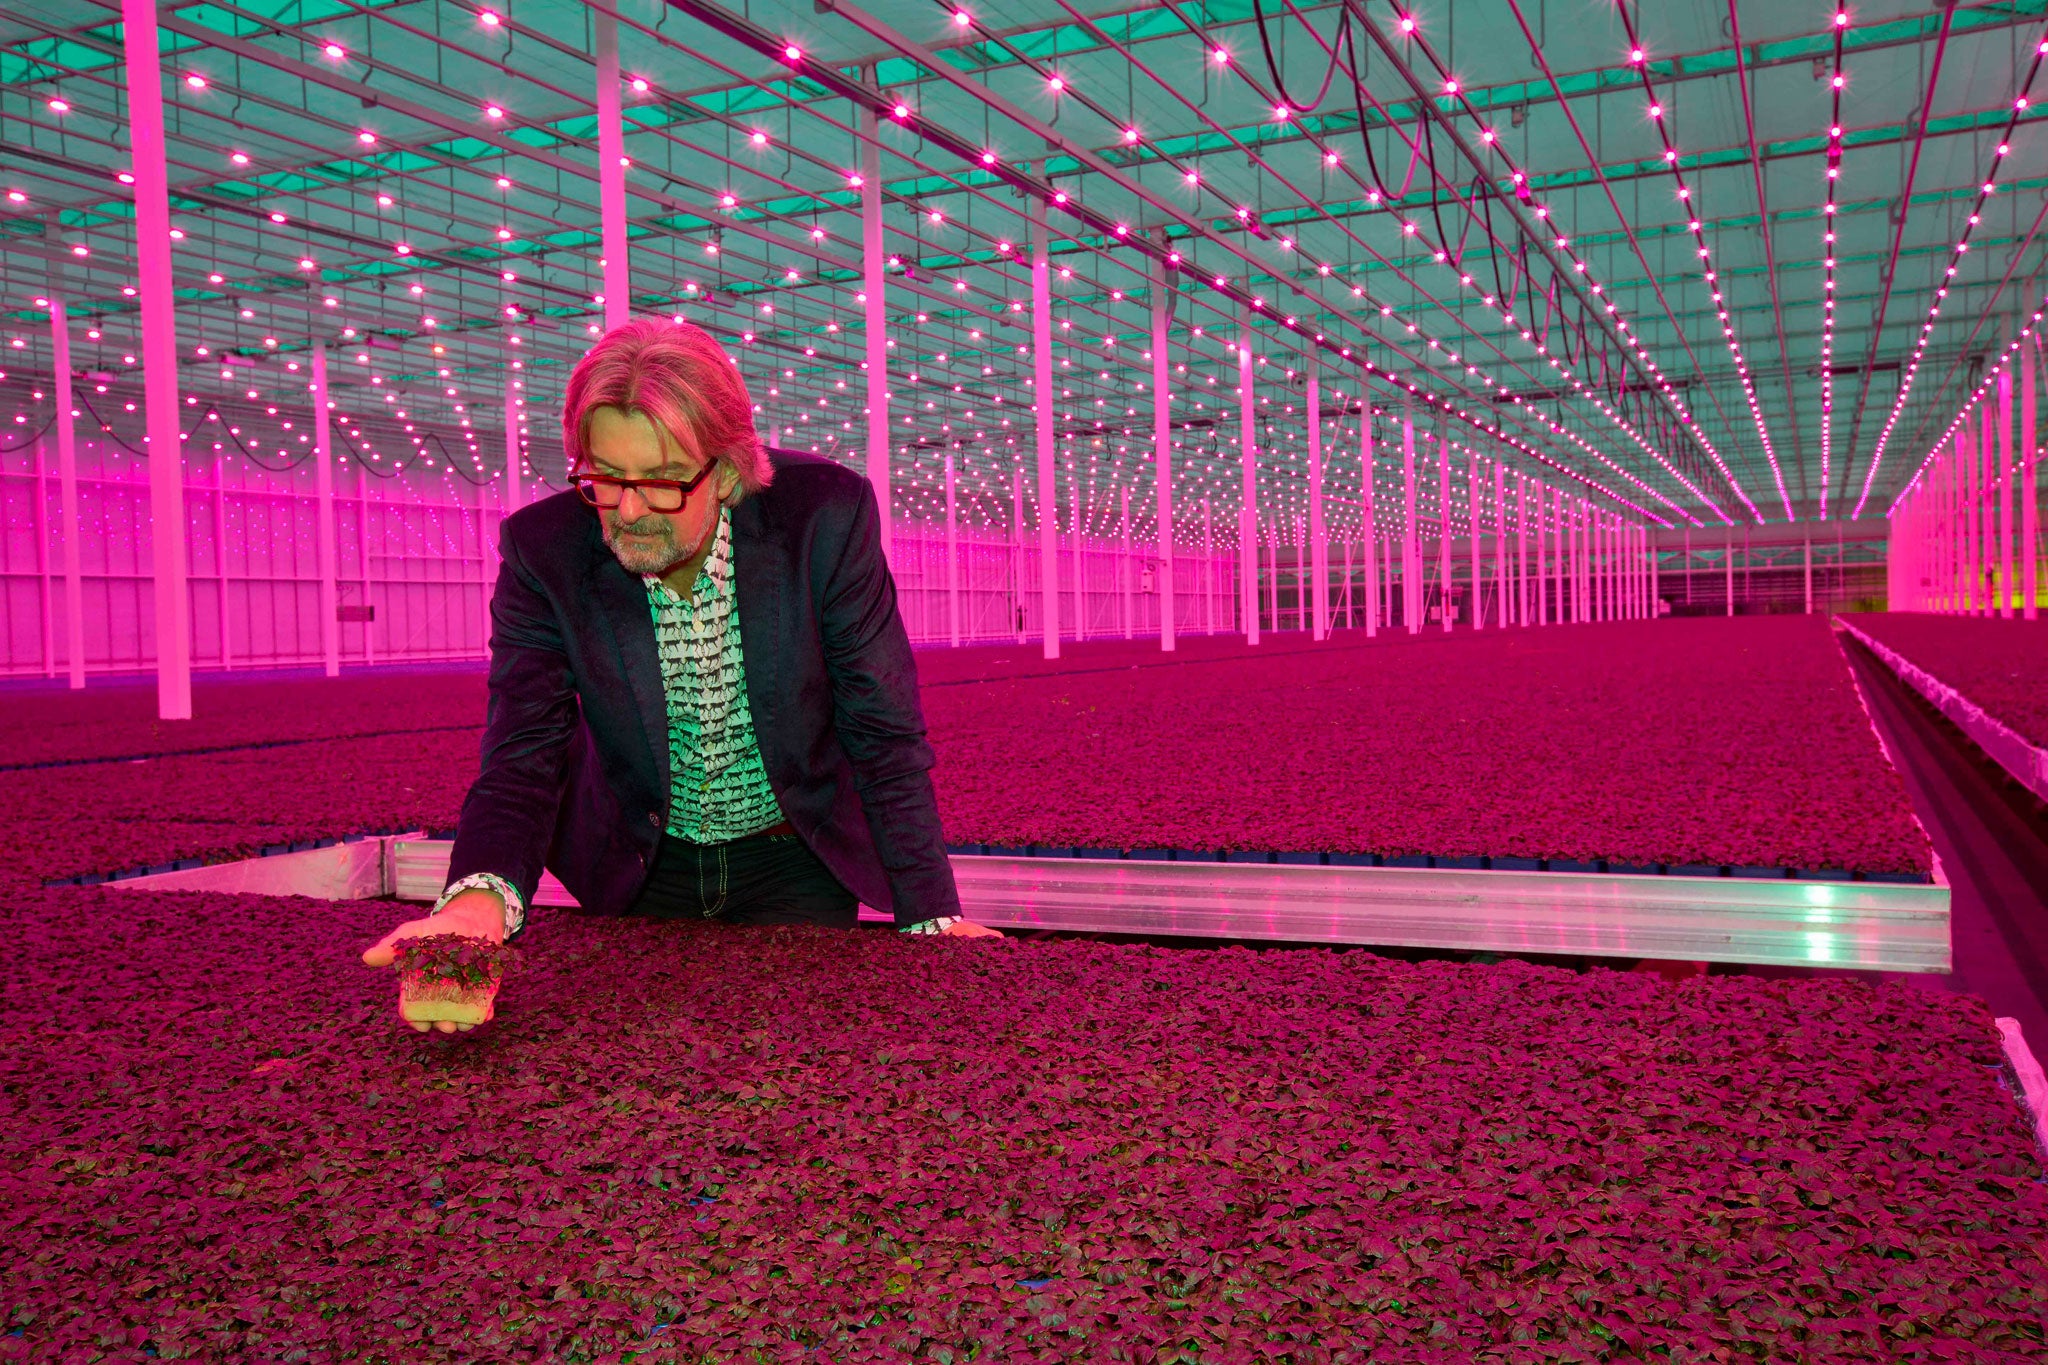 Rob Baan inspects his crop in his LED lit greenhouse